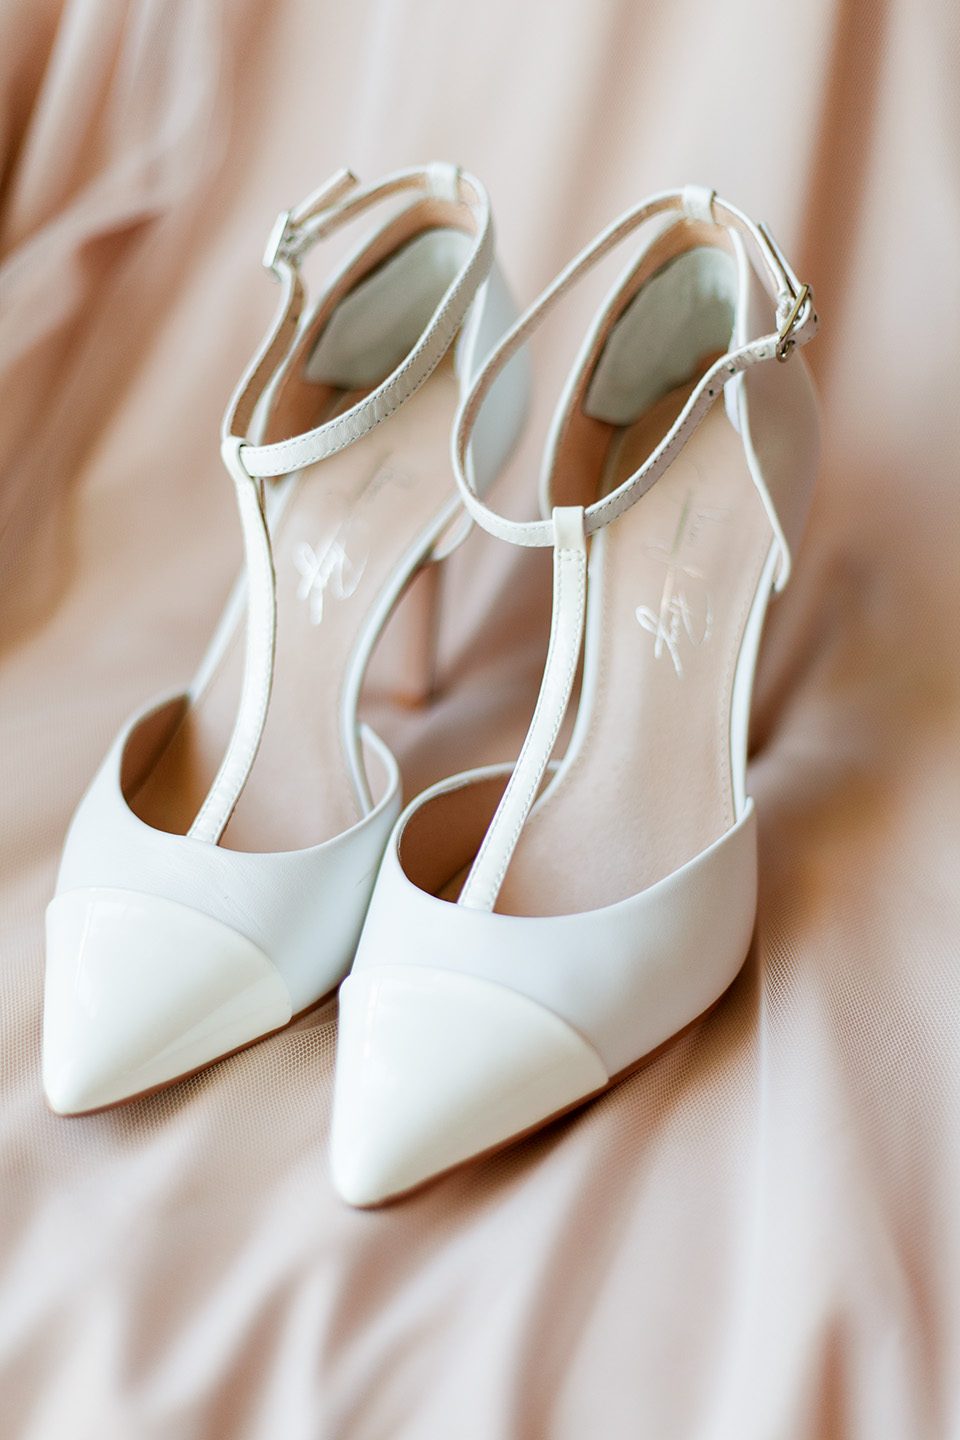 Bridal shoes photographed on the wedding day at The Vinoy in St. Pete, Florida | Debra Eby Photography Co.